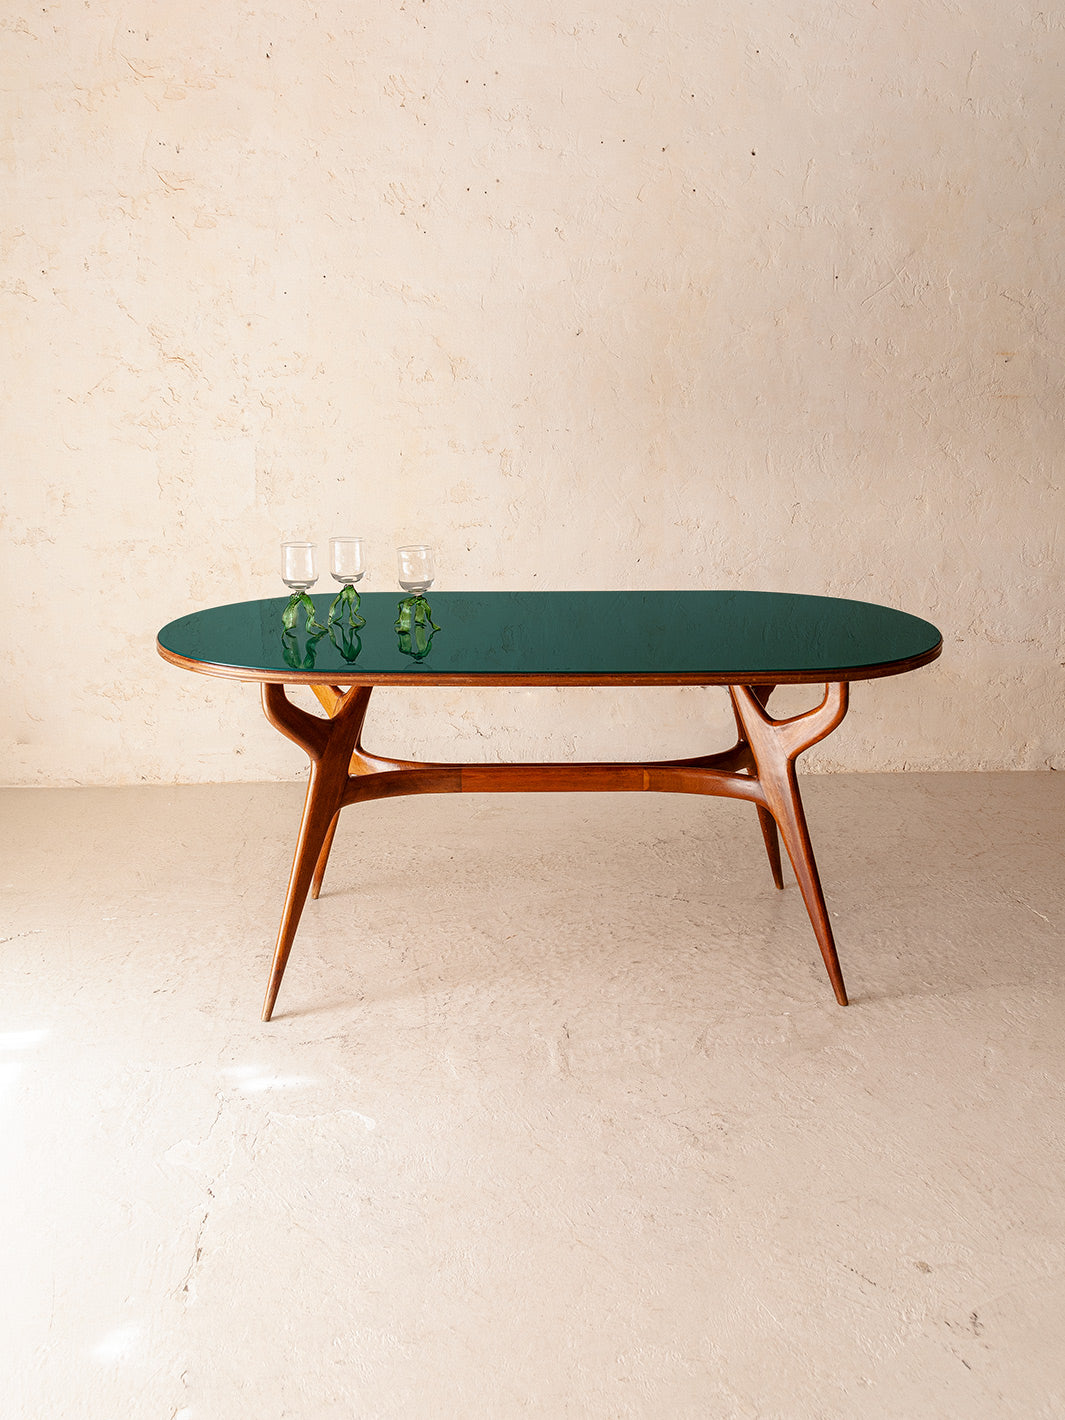 Italian walnut and celadon green glass table from the 50s 172cmx87cm